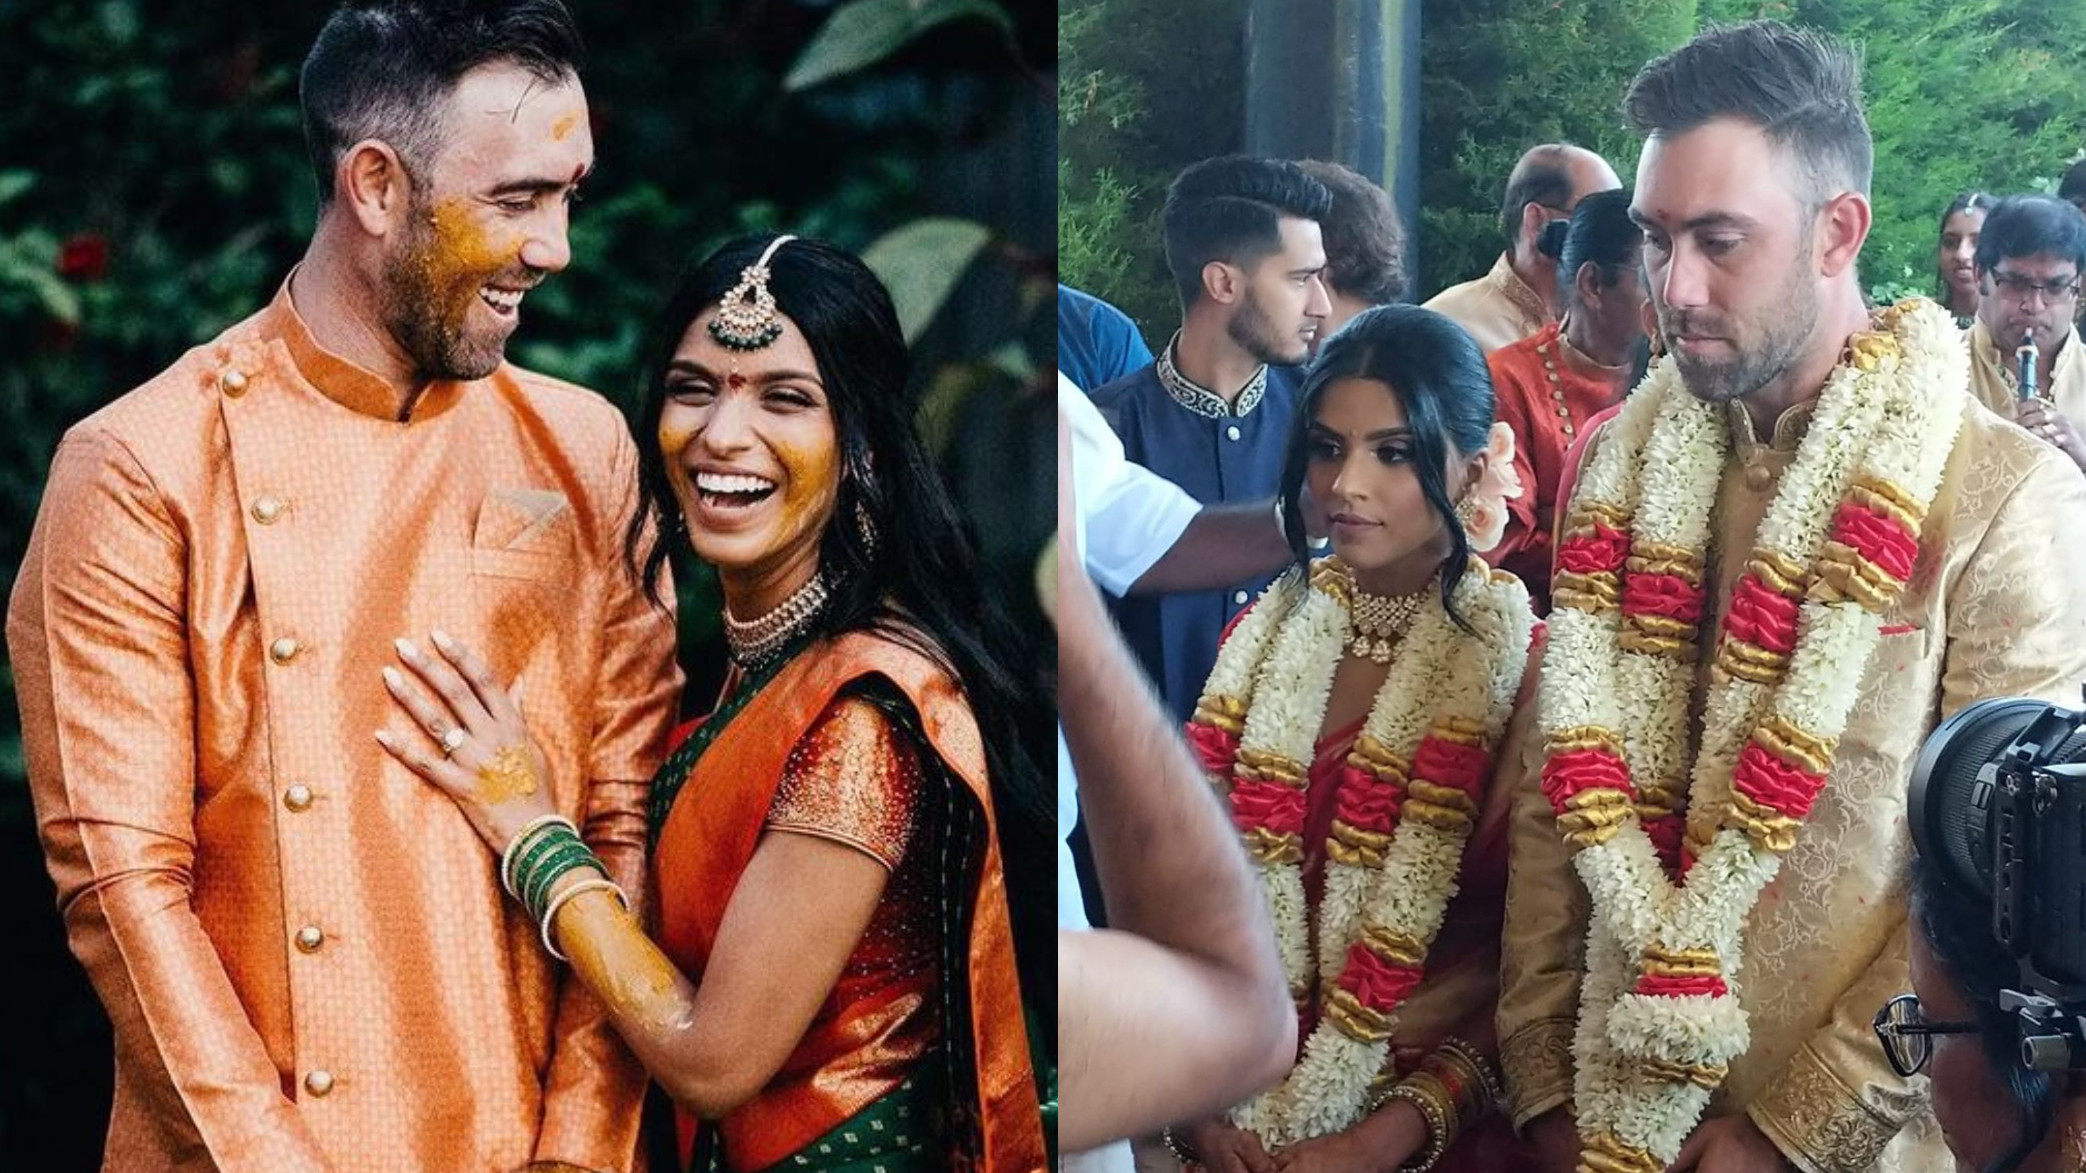 WATCH- Glenn Maxwell and Vini Raman tie knot in a traditional Indian wedding ceremony; videos go viral